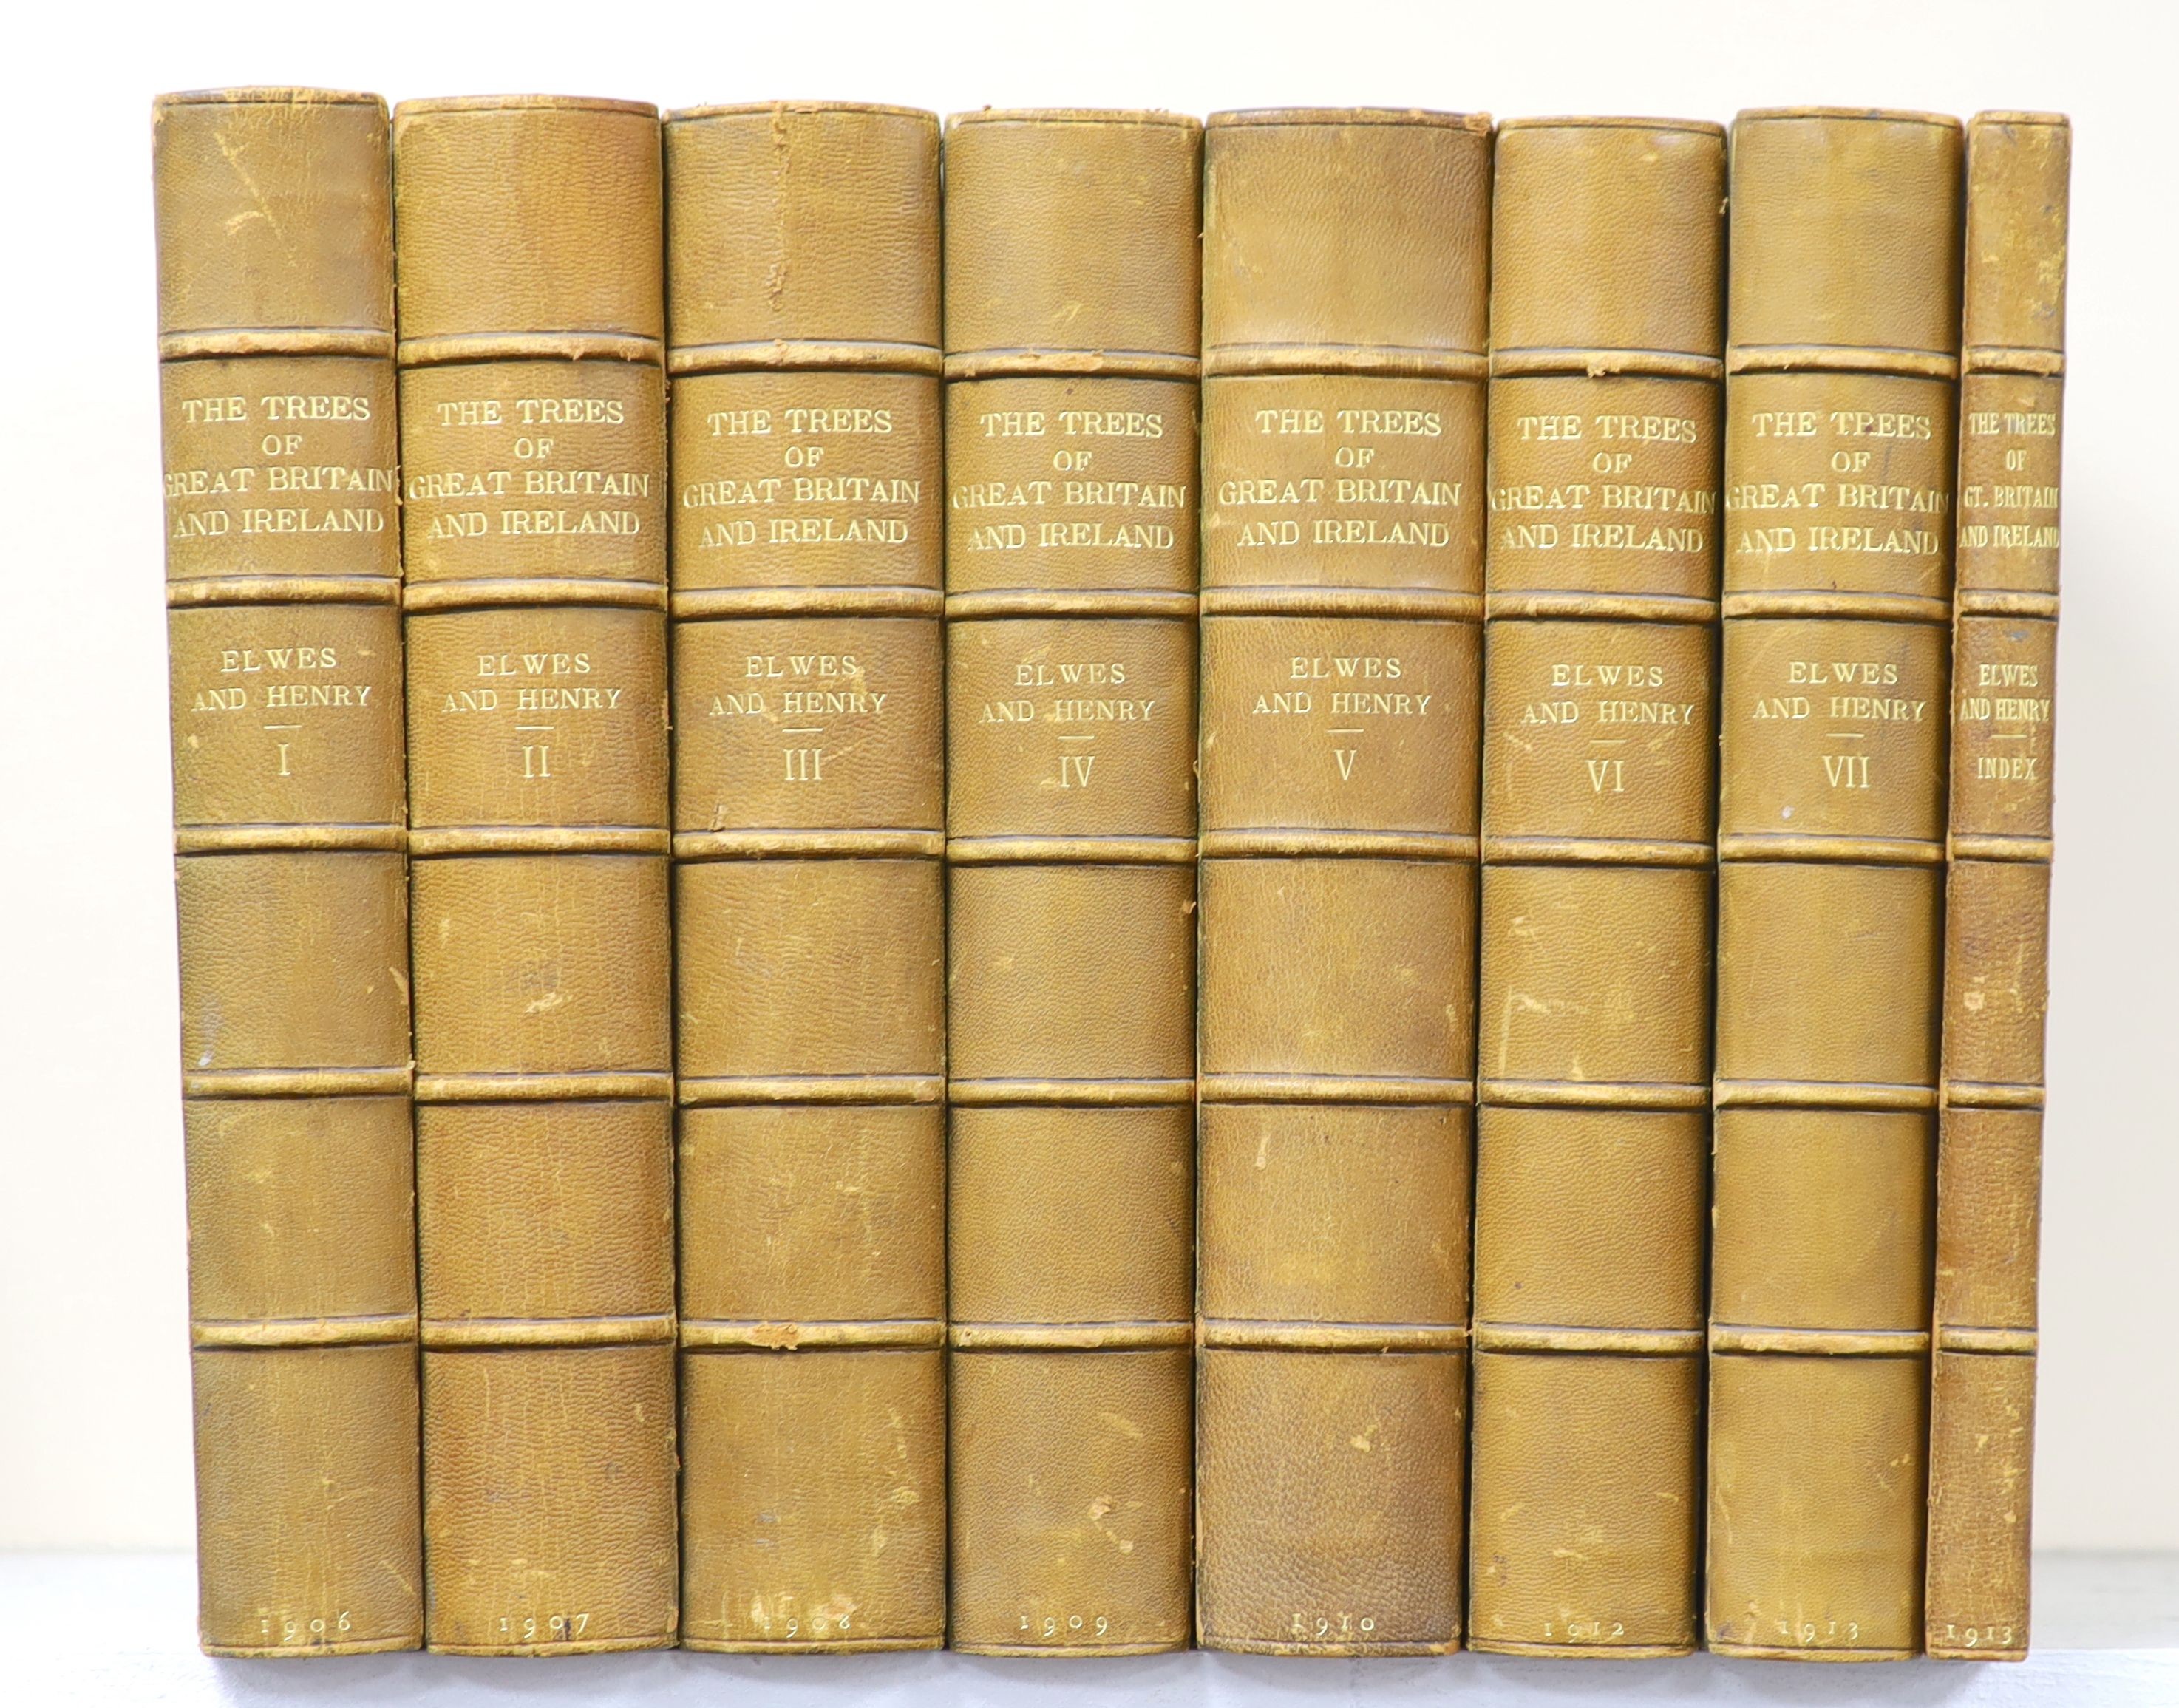 Elwes, Henry John and Henry, Augustine - The Trees of Great Britain and Ireland, 8 vols including index, contemporary green half morocco, spines faded, 7 colour titles, 412 plates, bookplate of Edward Hudson, Lindisfarne